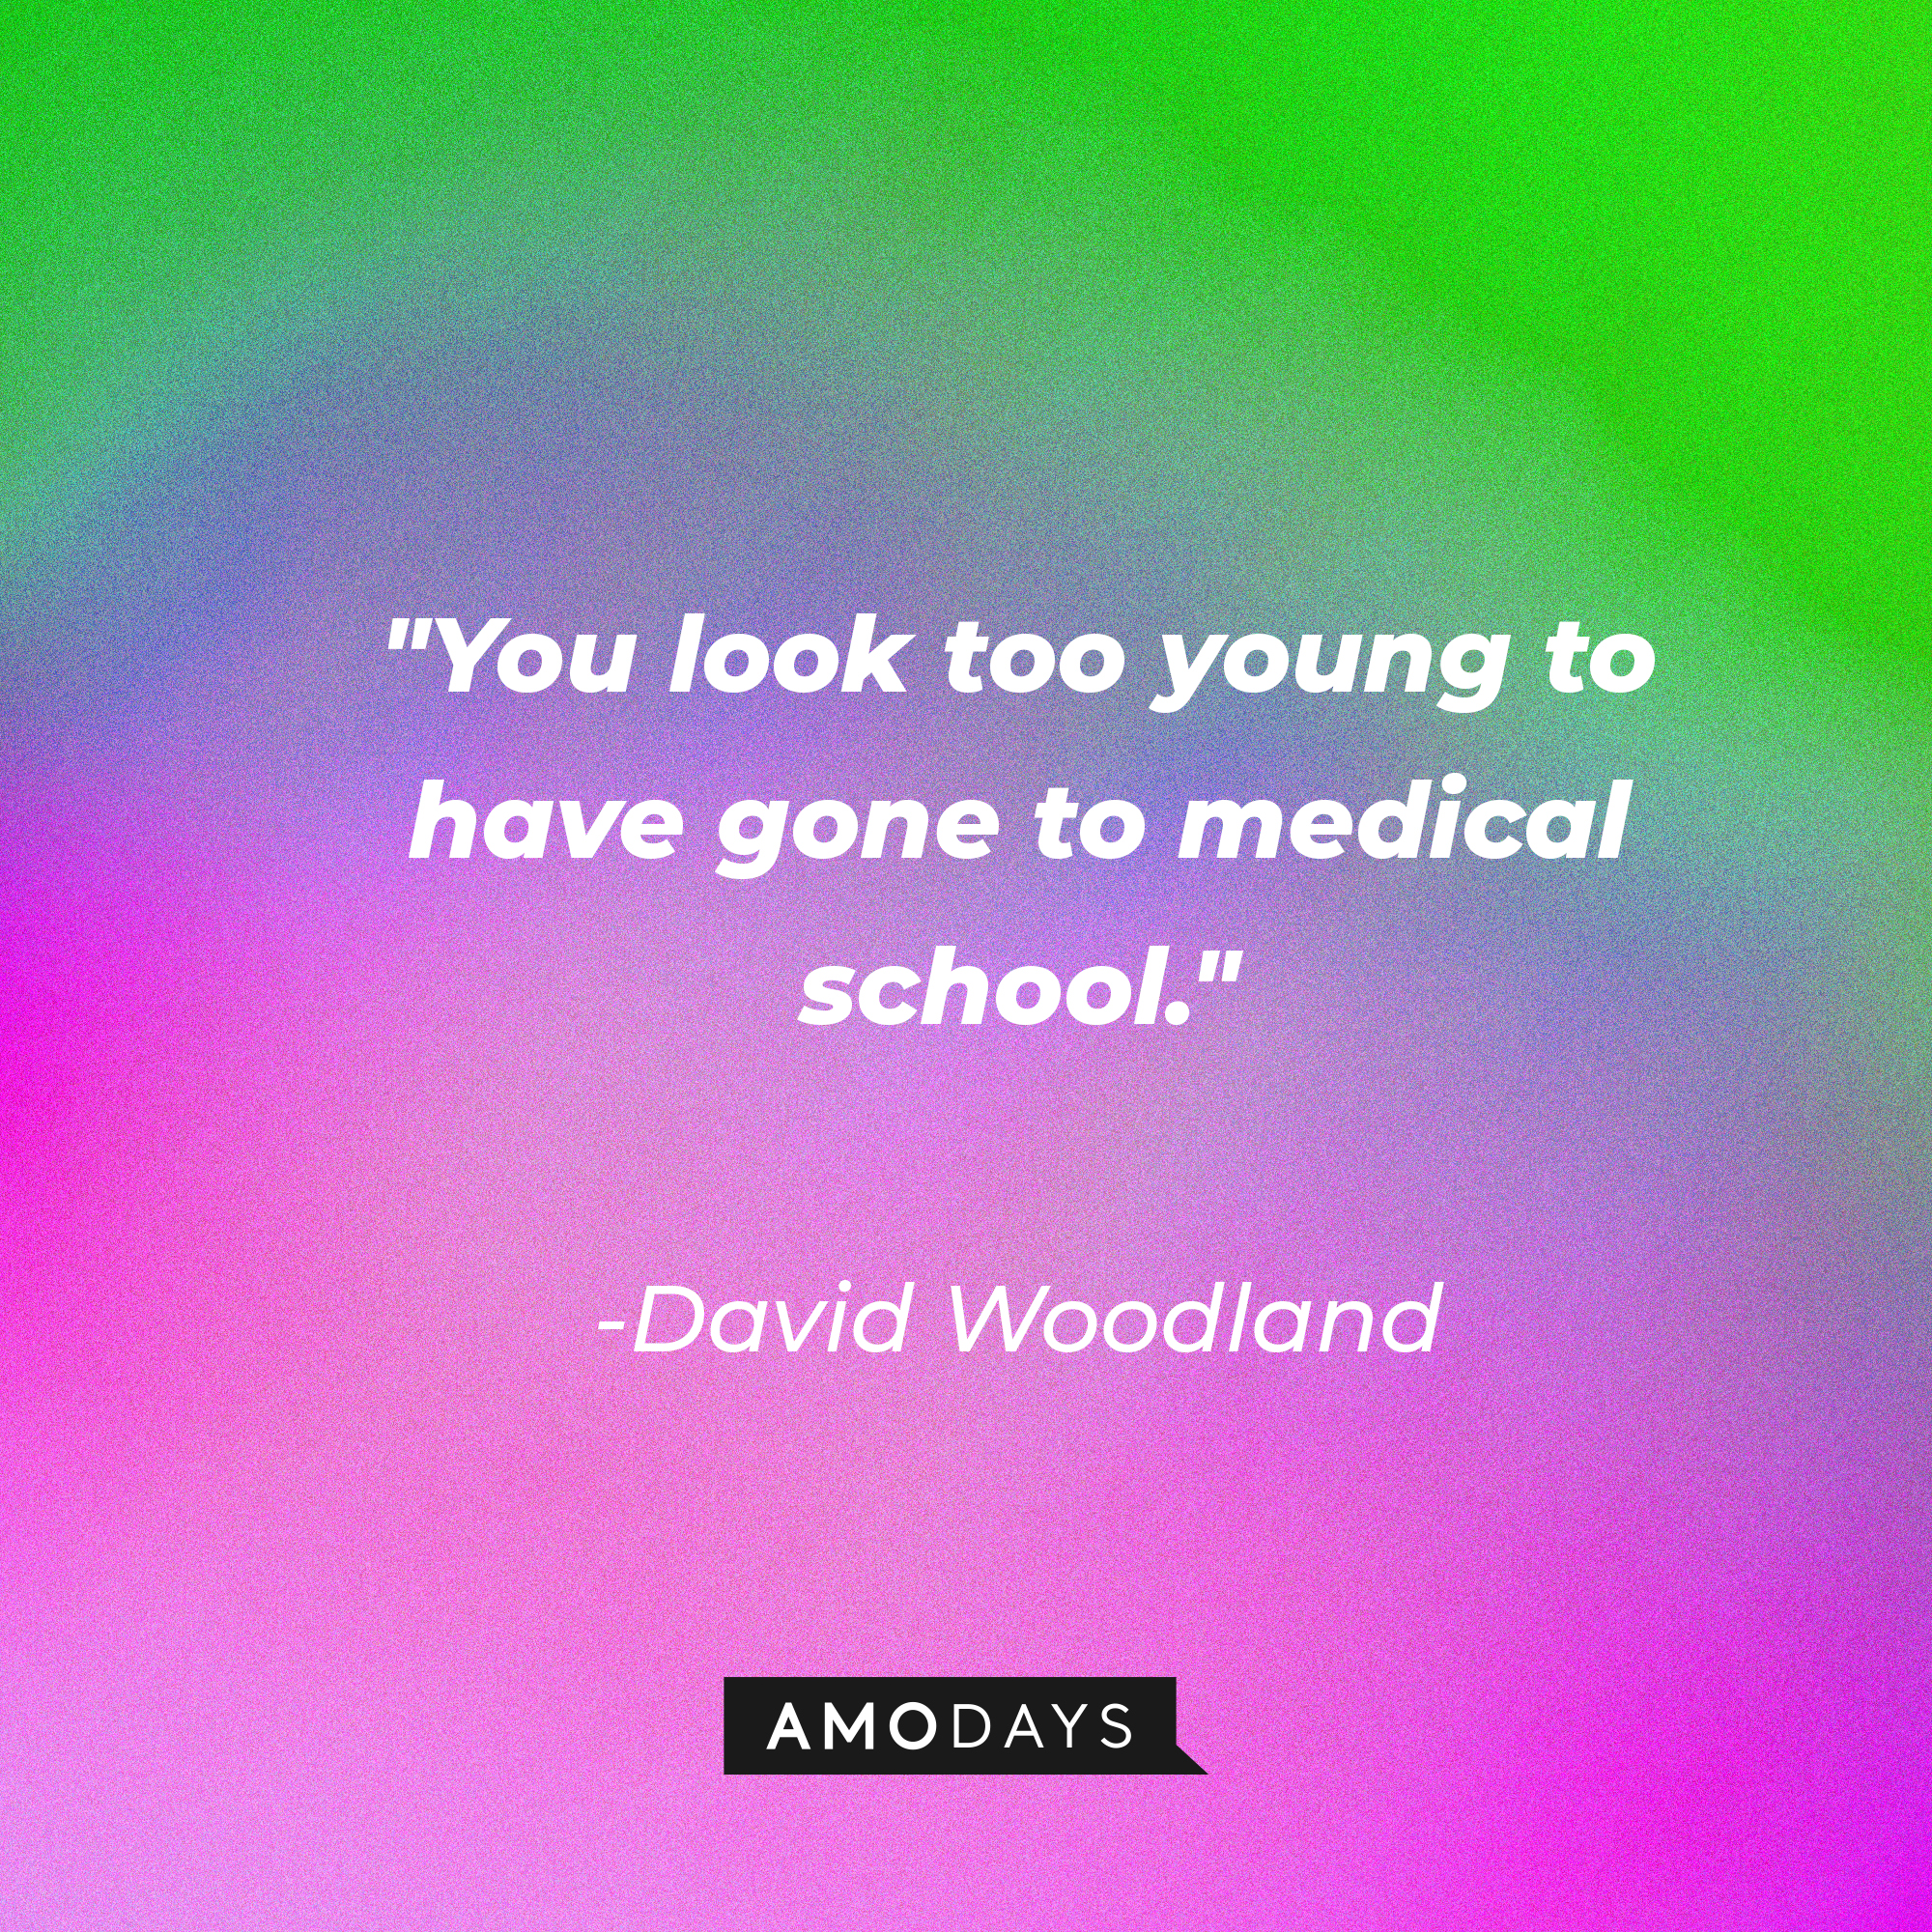 David Woodland's quote: "You look too young to have gone to medical school." | Source: AmoDays